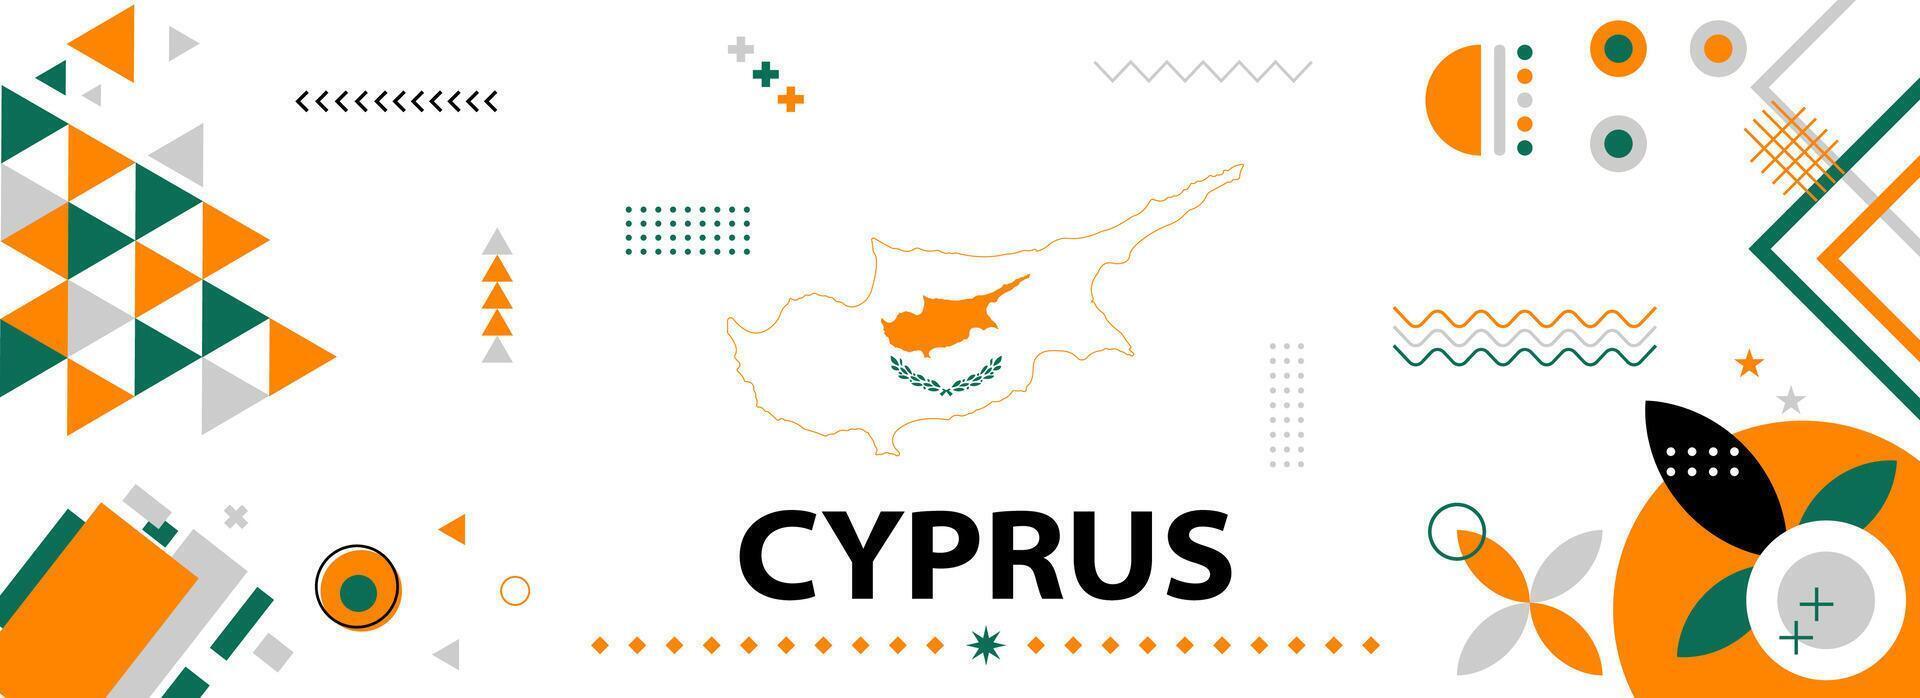 Cyprus national or independence day banner for country celebration. Cyprus flag map modern retro design with typorgaphy abstract geometric icons. Vector illustration.